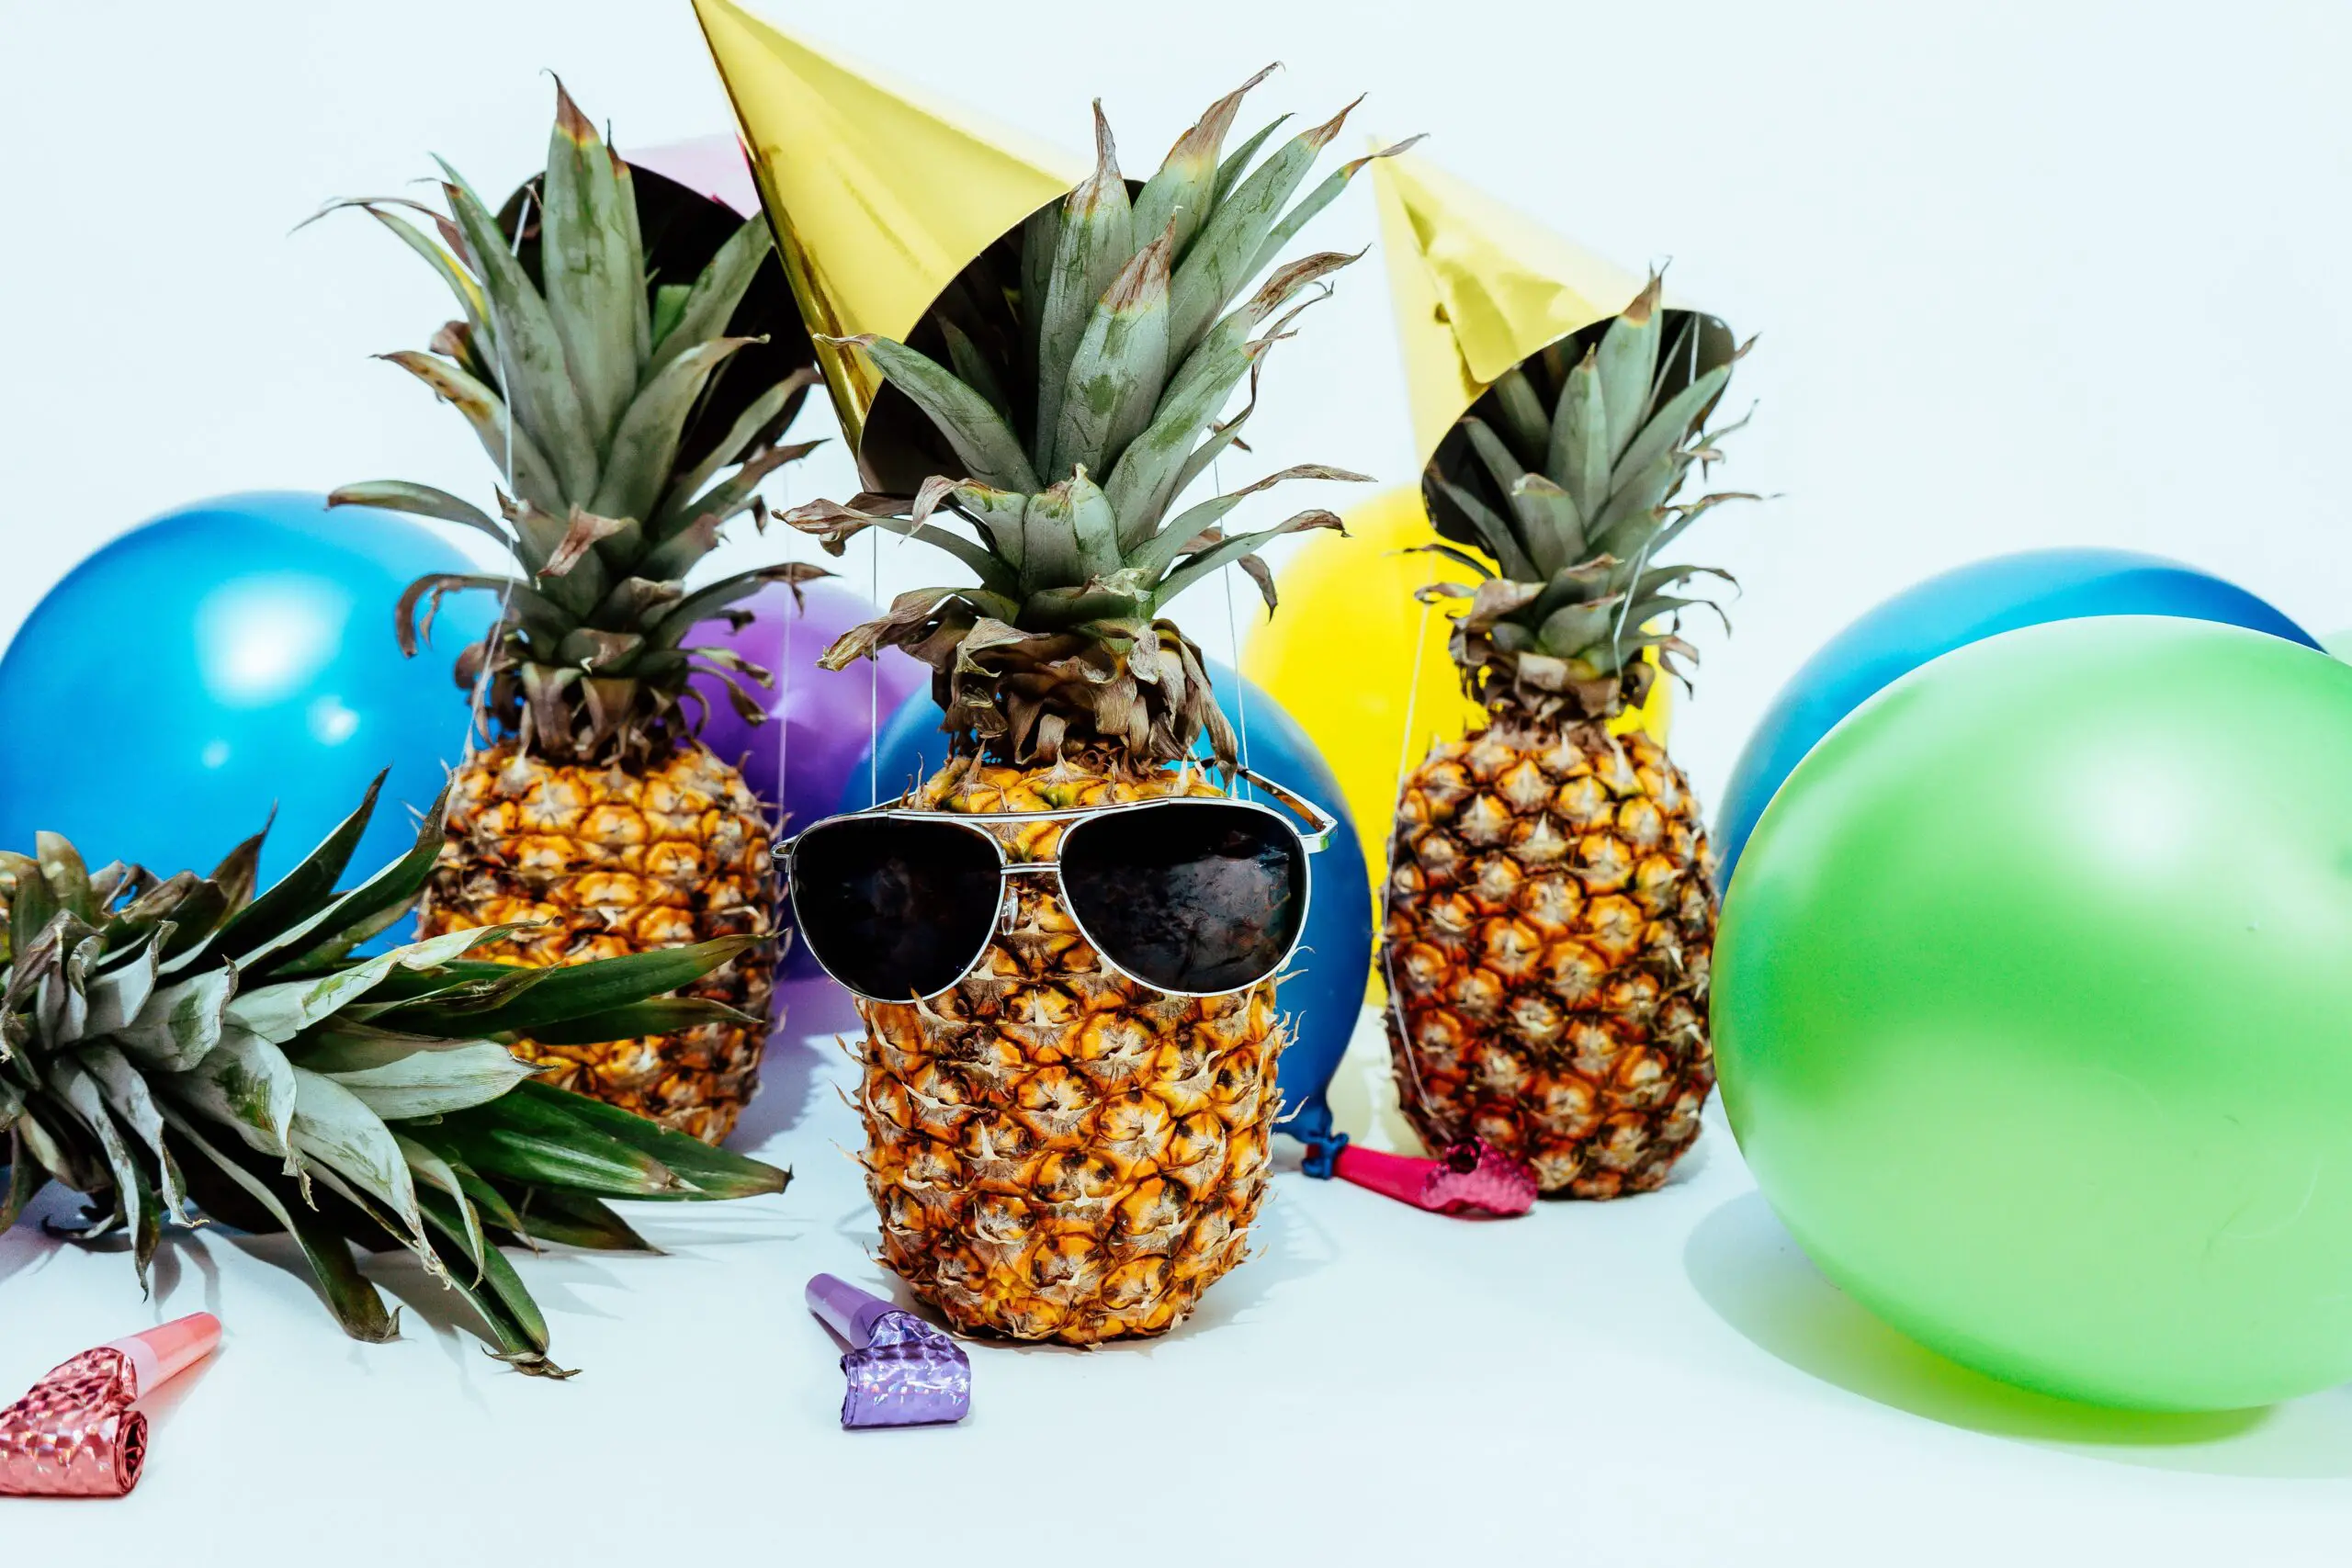 4 pineapples (one wearing sunglasses) are surrounded by balloons and party hats!